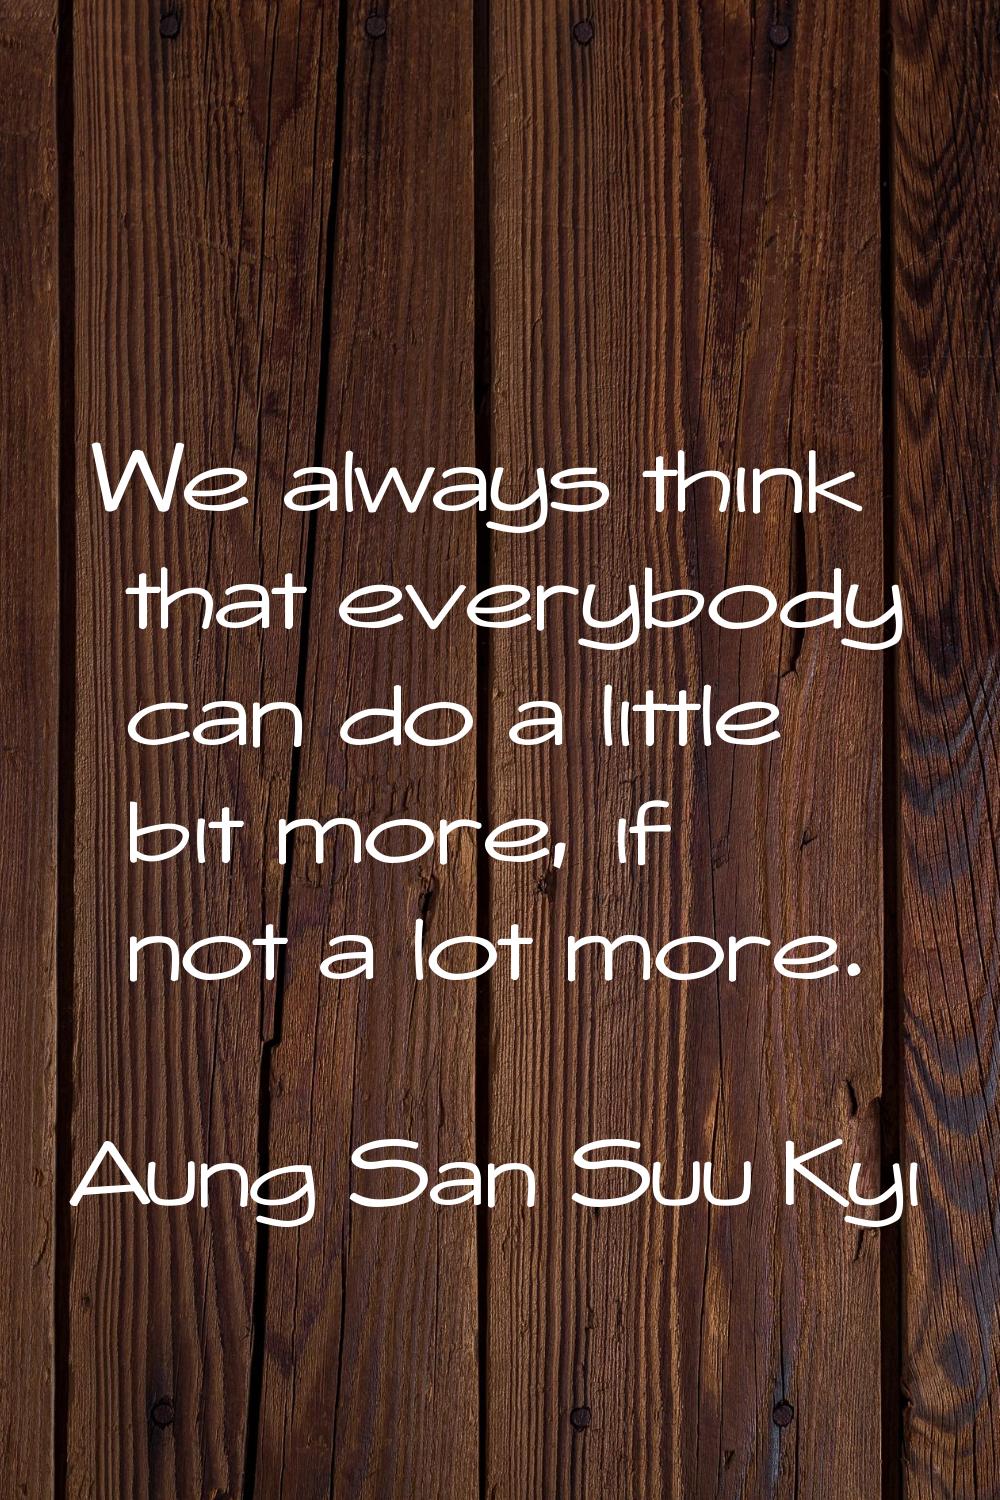 We always think that everybody can do a little bit more, if not a lot more.